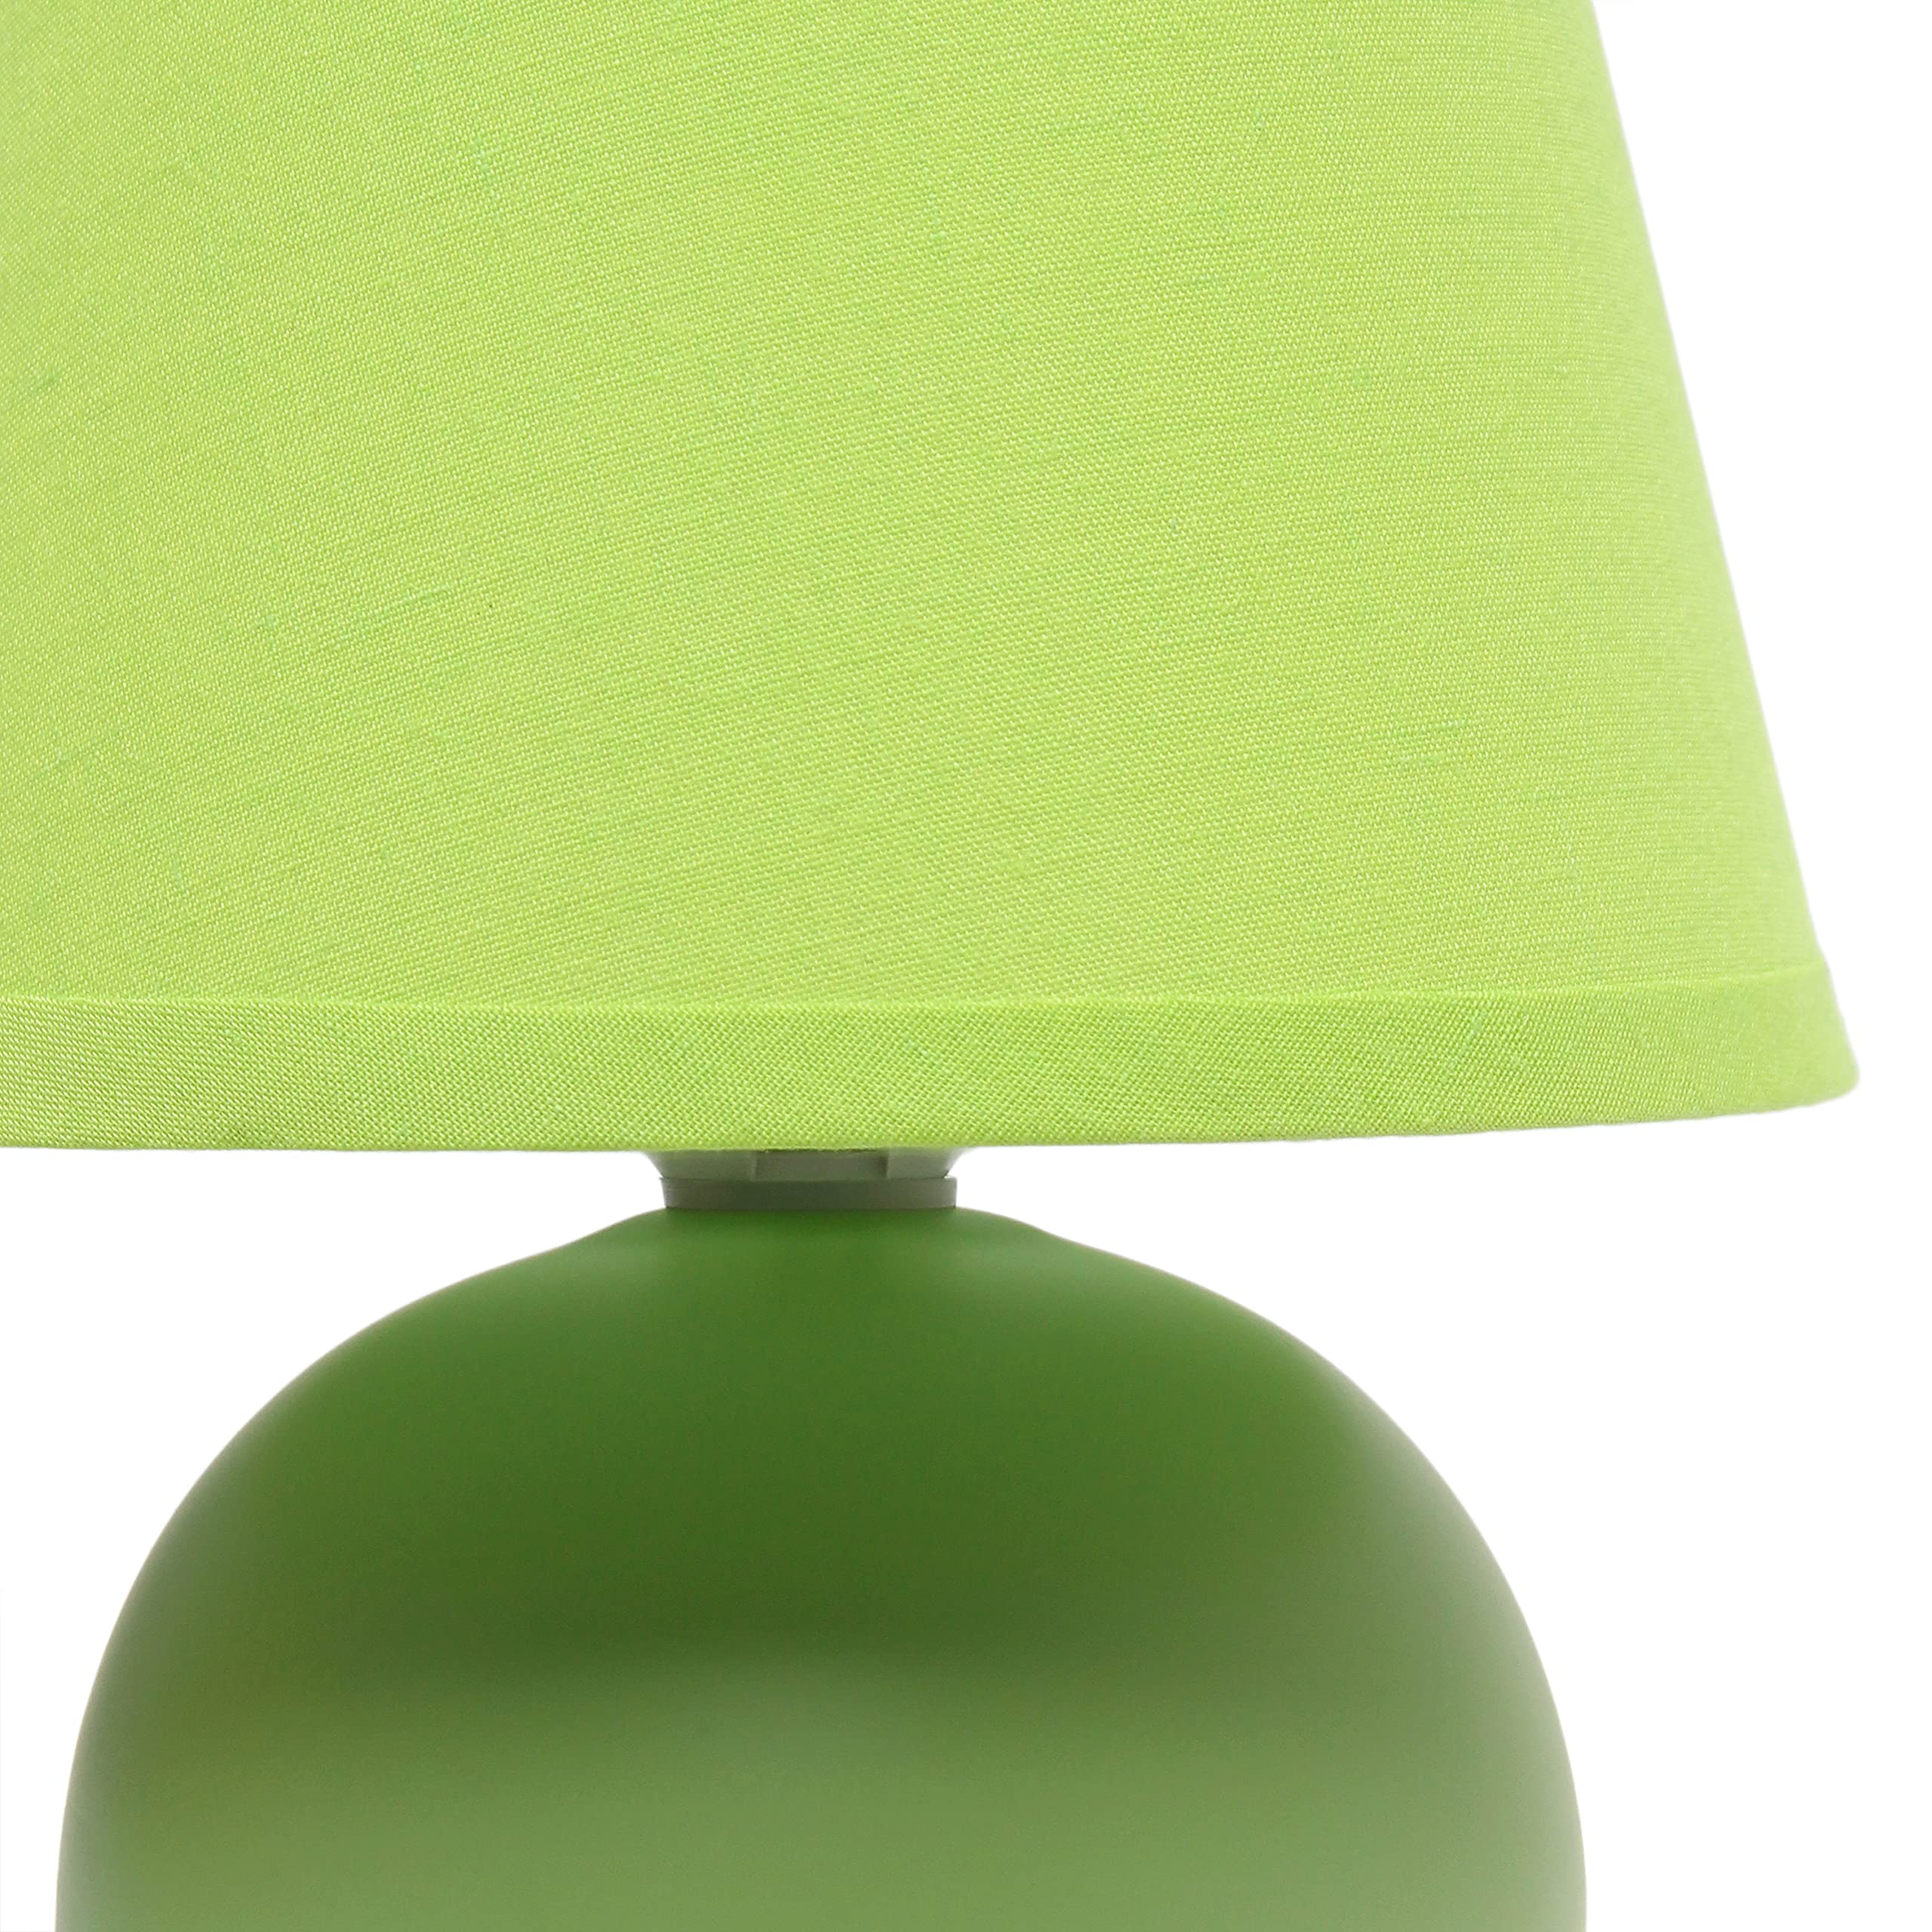 Simple Designs LT2008-GRN-2PK Mini Ceramic Globe Table Lamp 2 Pack Set with Matching Fabric Shade, Green